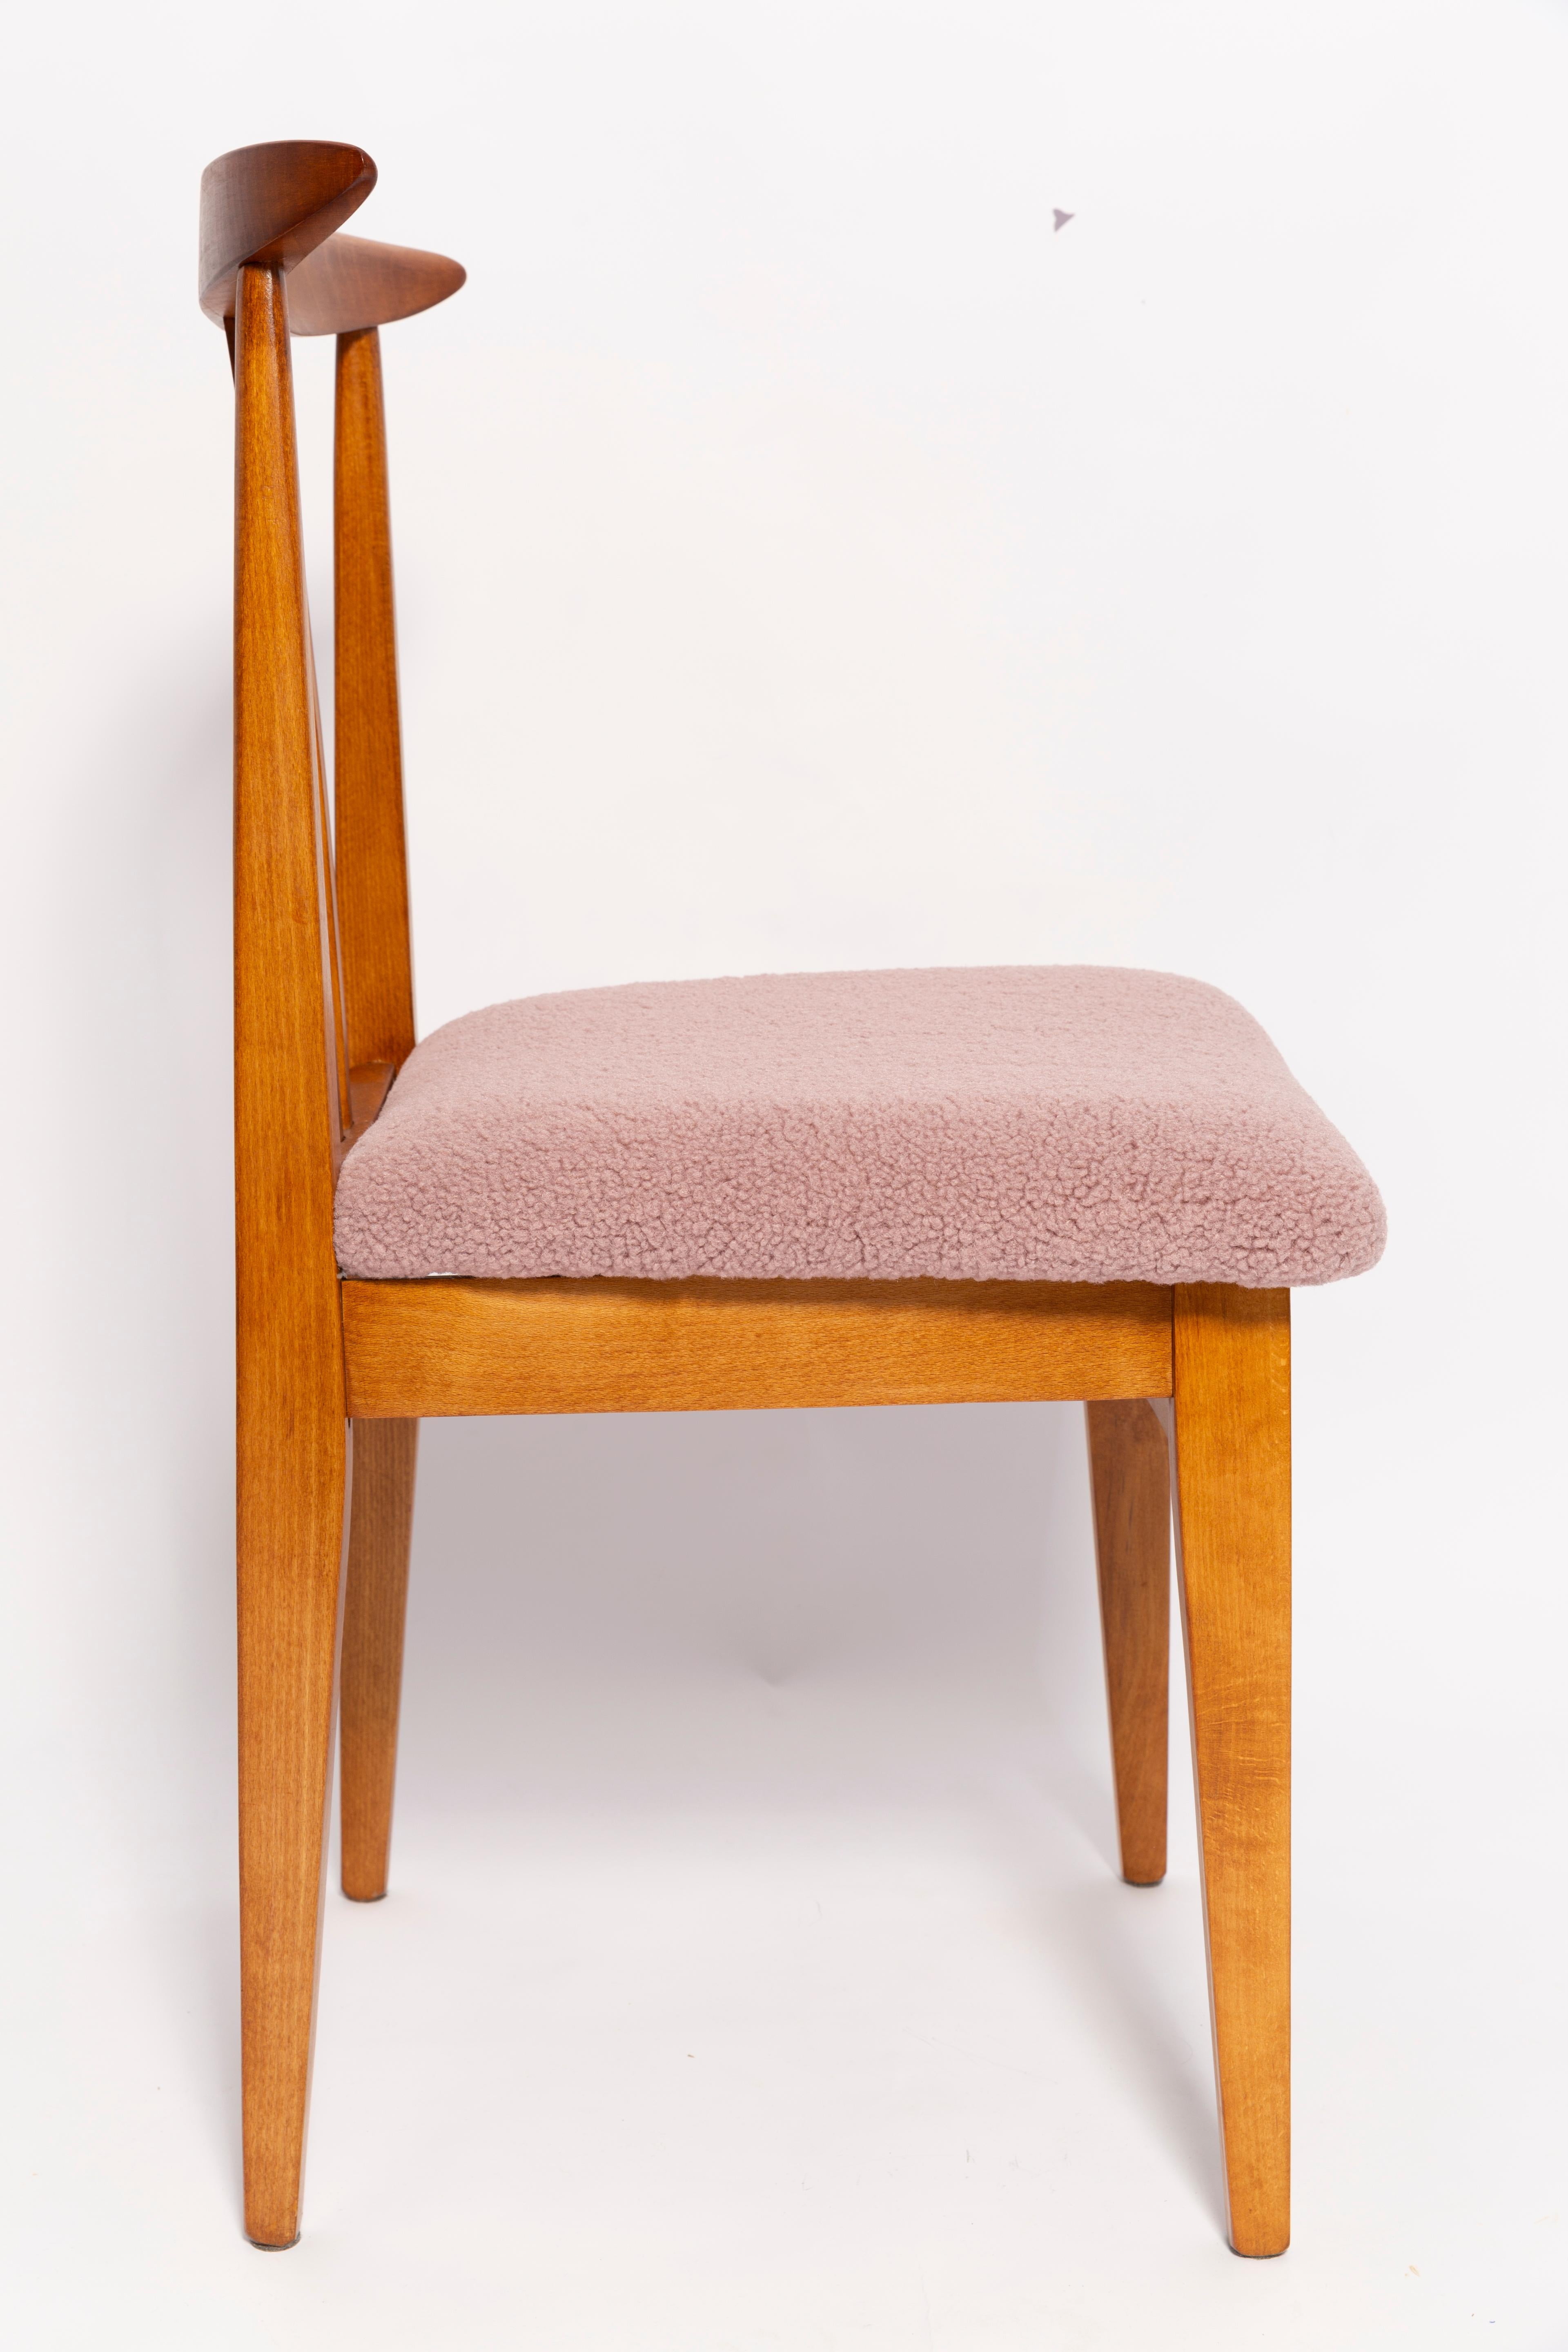 Polish Set of Six Mid-Century Pink Blush Boucle Chairs, by M. Zielinski, Europe, 1960s For Sale